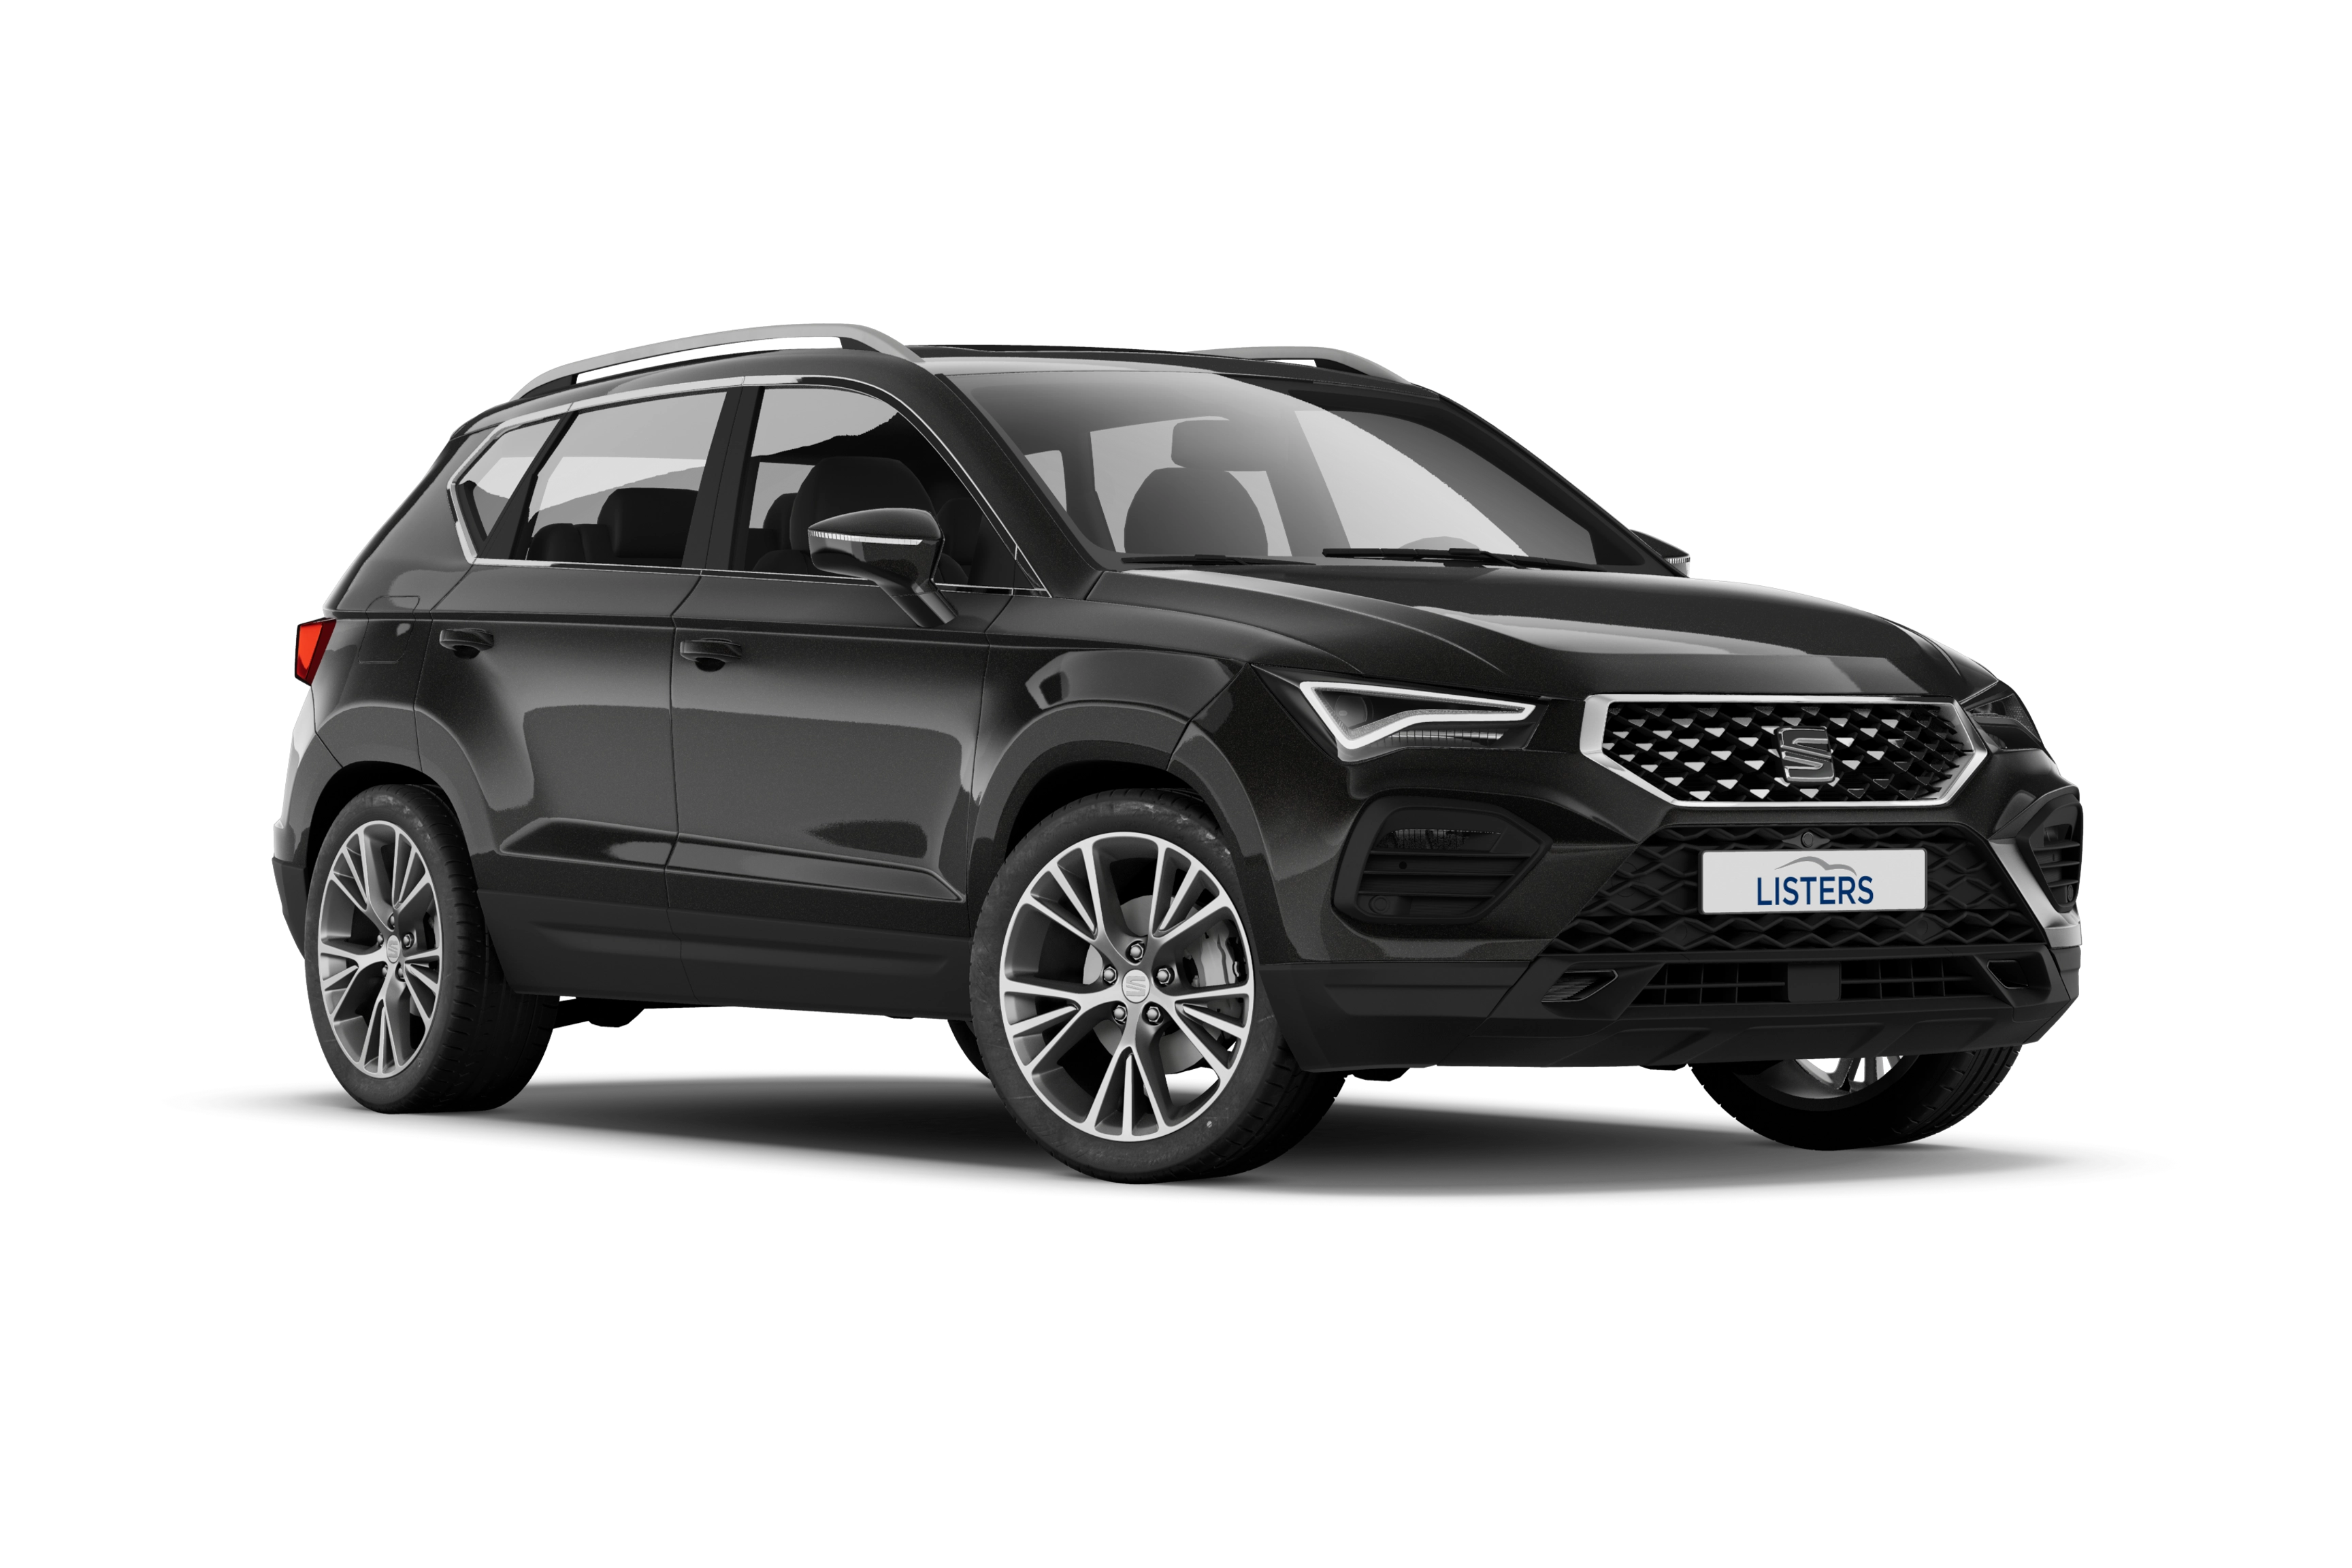 SEAT Ateca Contract Hire & Leasing Offers